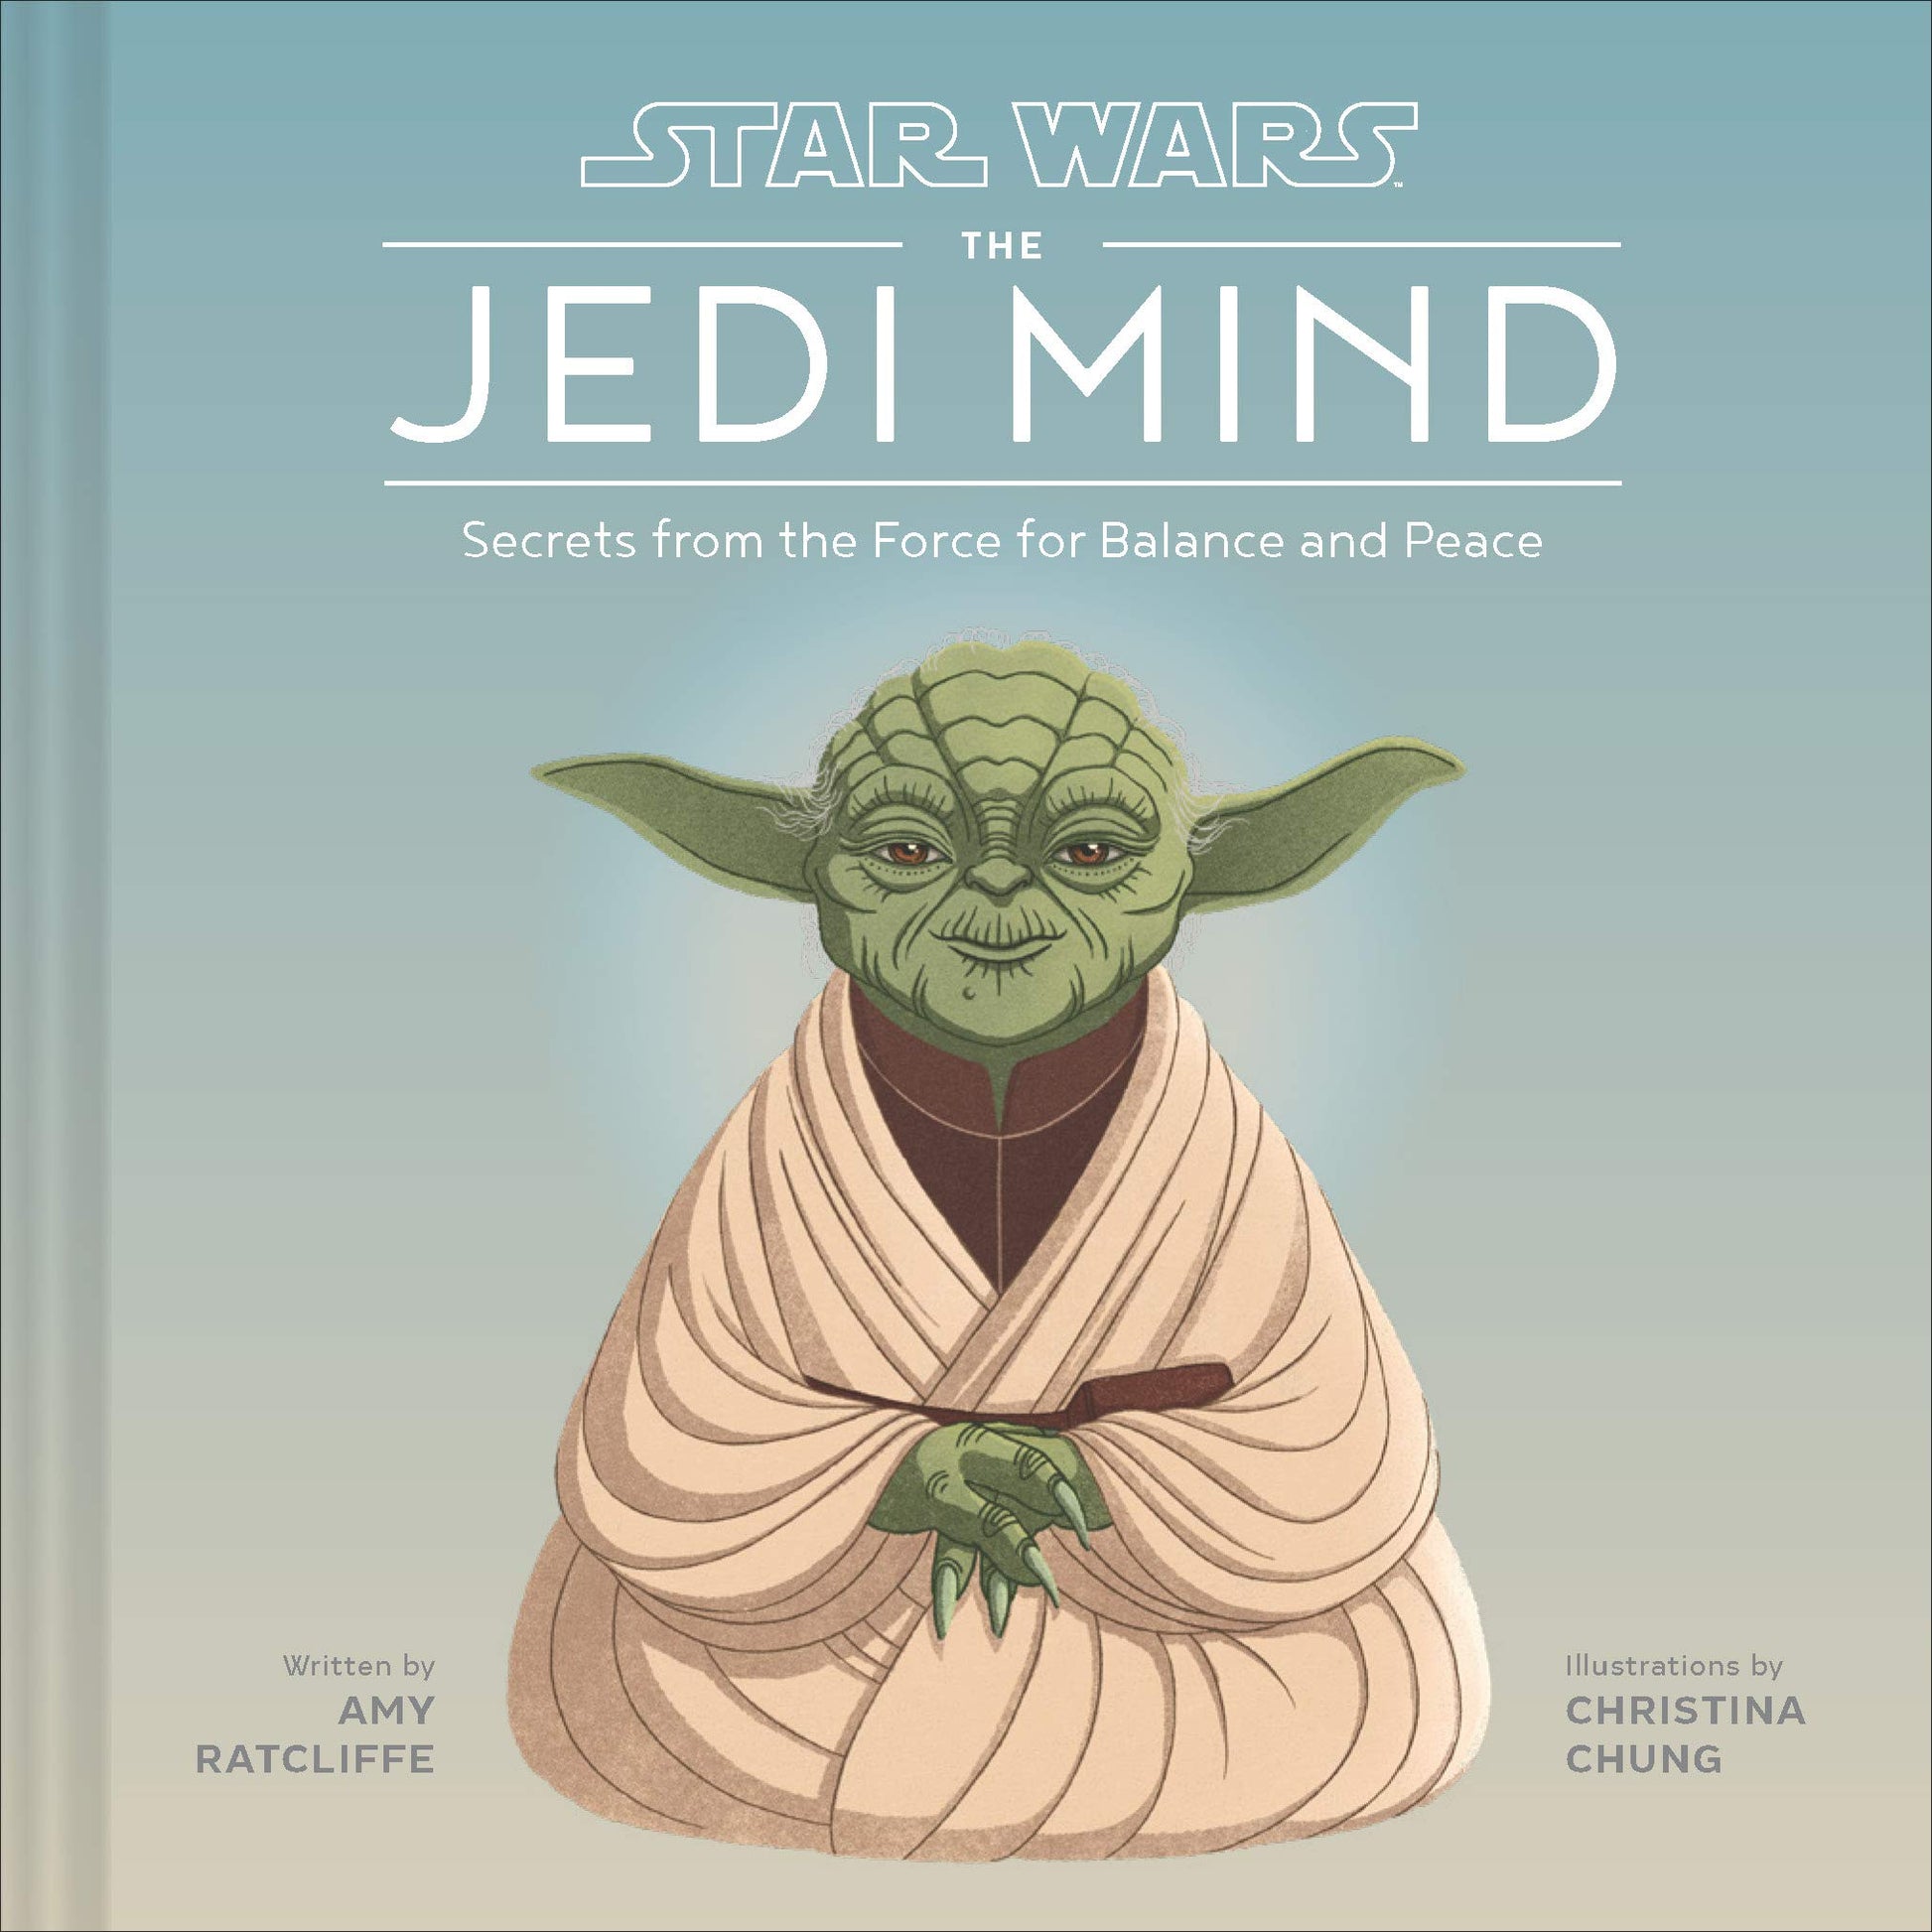 front cover of book with graphic of yoda, title, authors name, and illustrators name